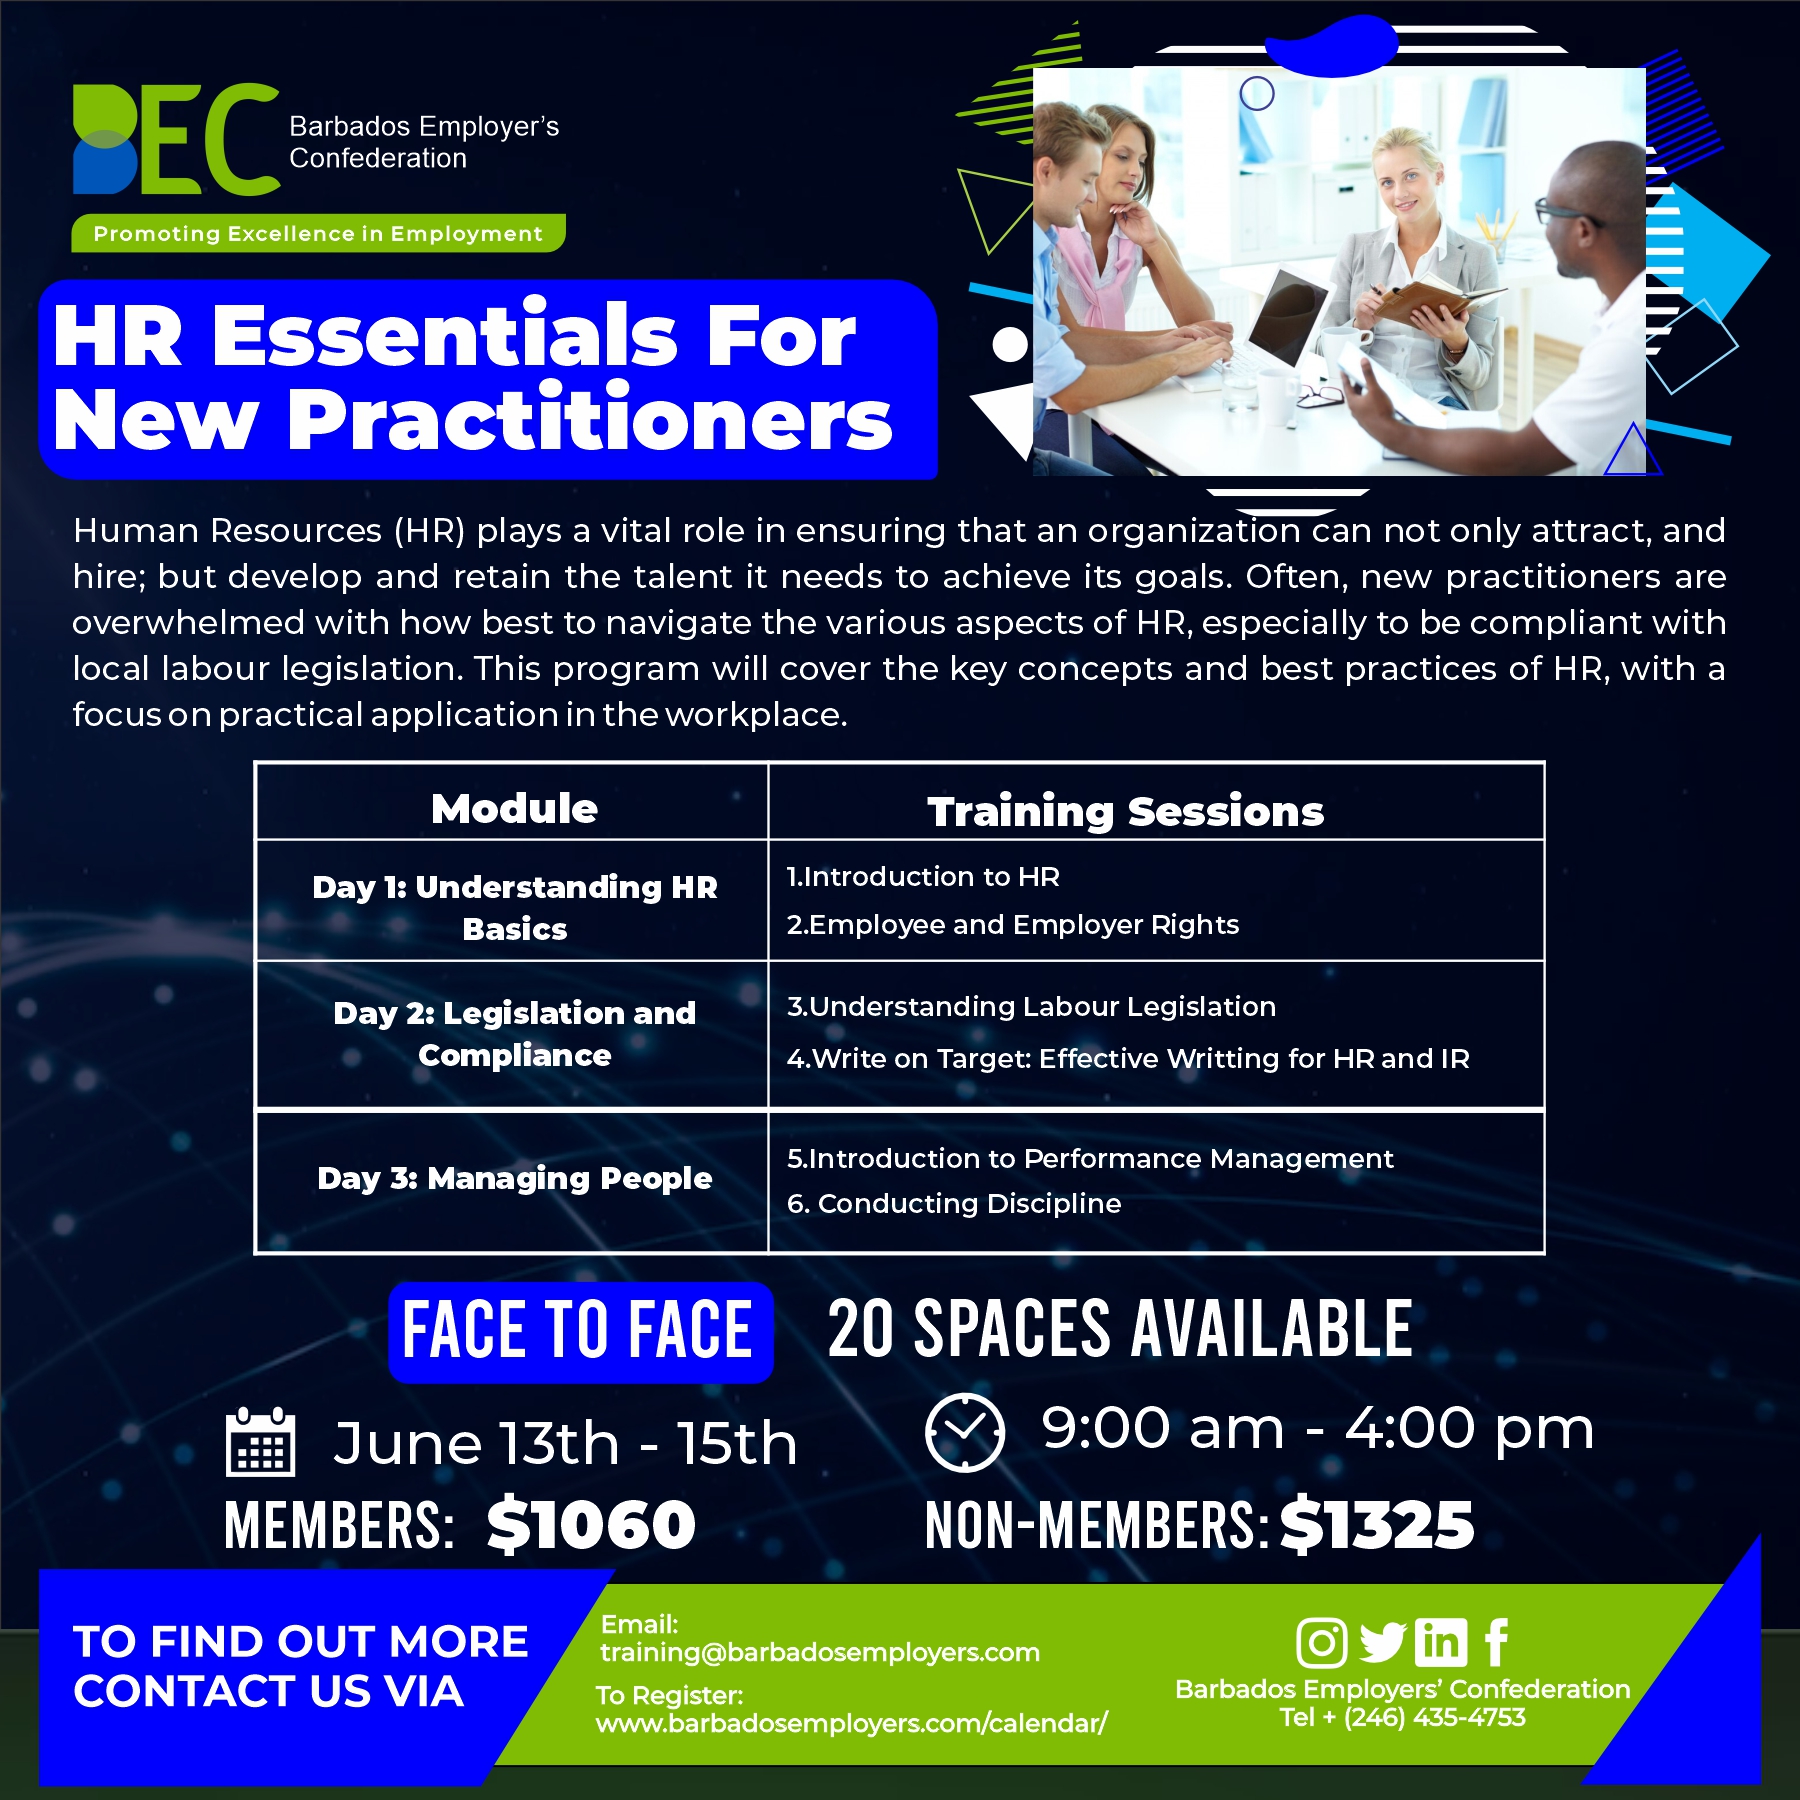 HR Essentials for New Practitioners